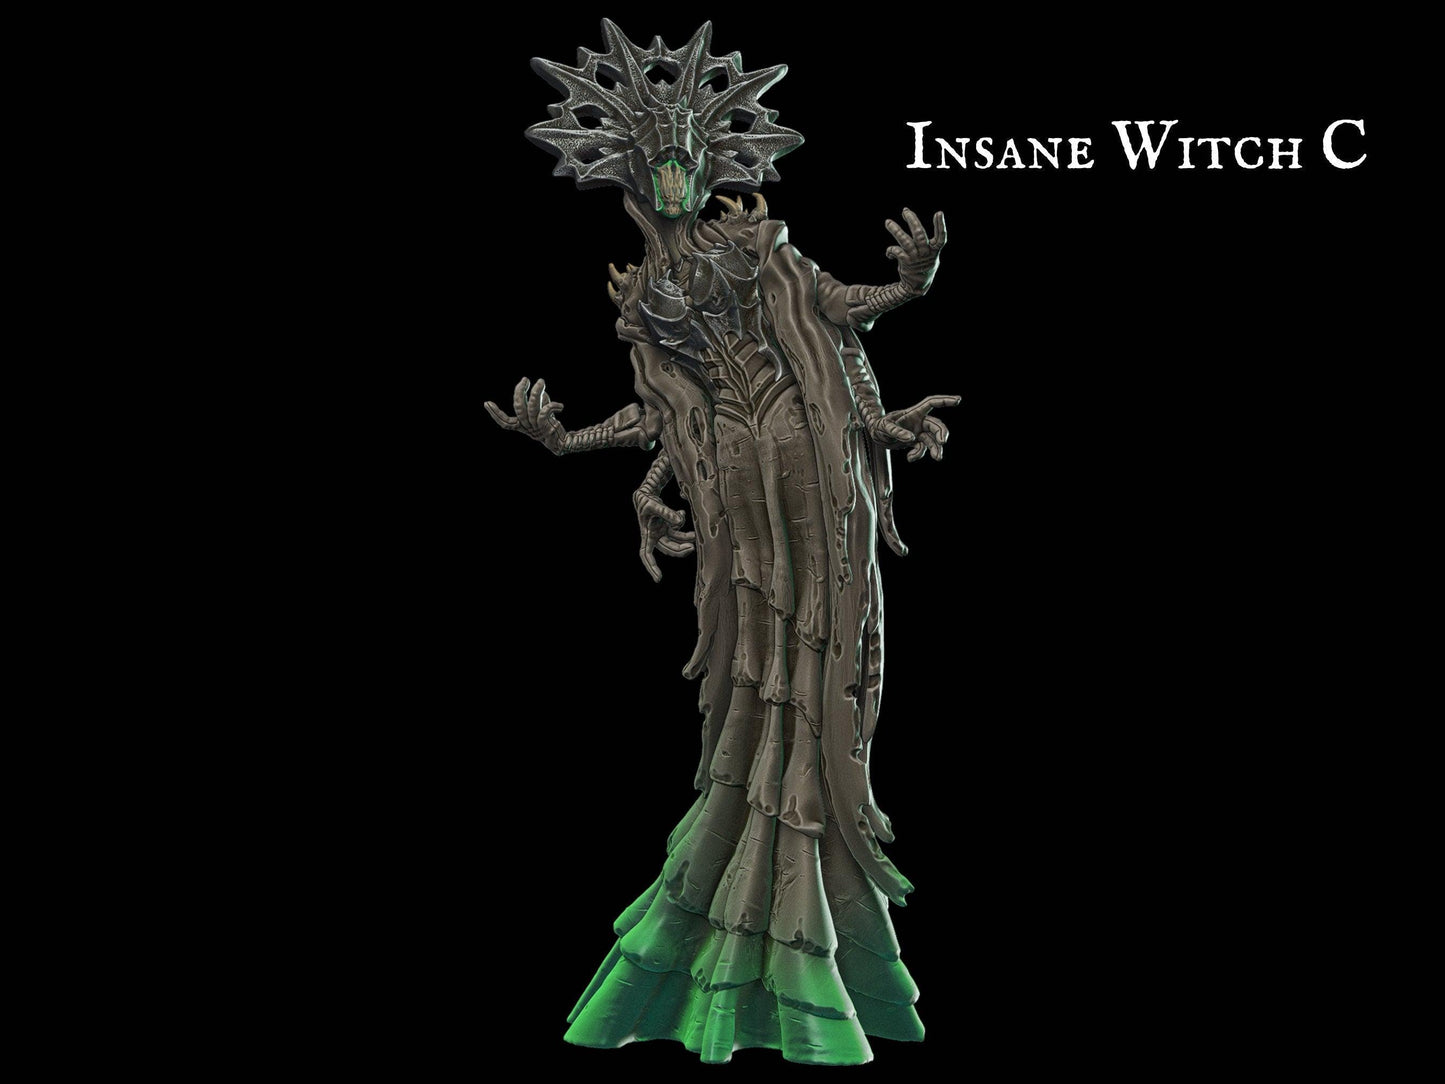 Insane Witch Miniature Undead Spellcaster 28mm scale Tabletop gaming DnD Miniature Dungeons and Dragons dnd 5e dungeon master gift sorcerer miniature - Plague Miniatures shop for DnD Miniatures